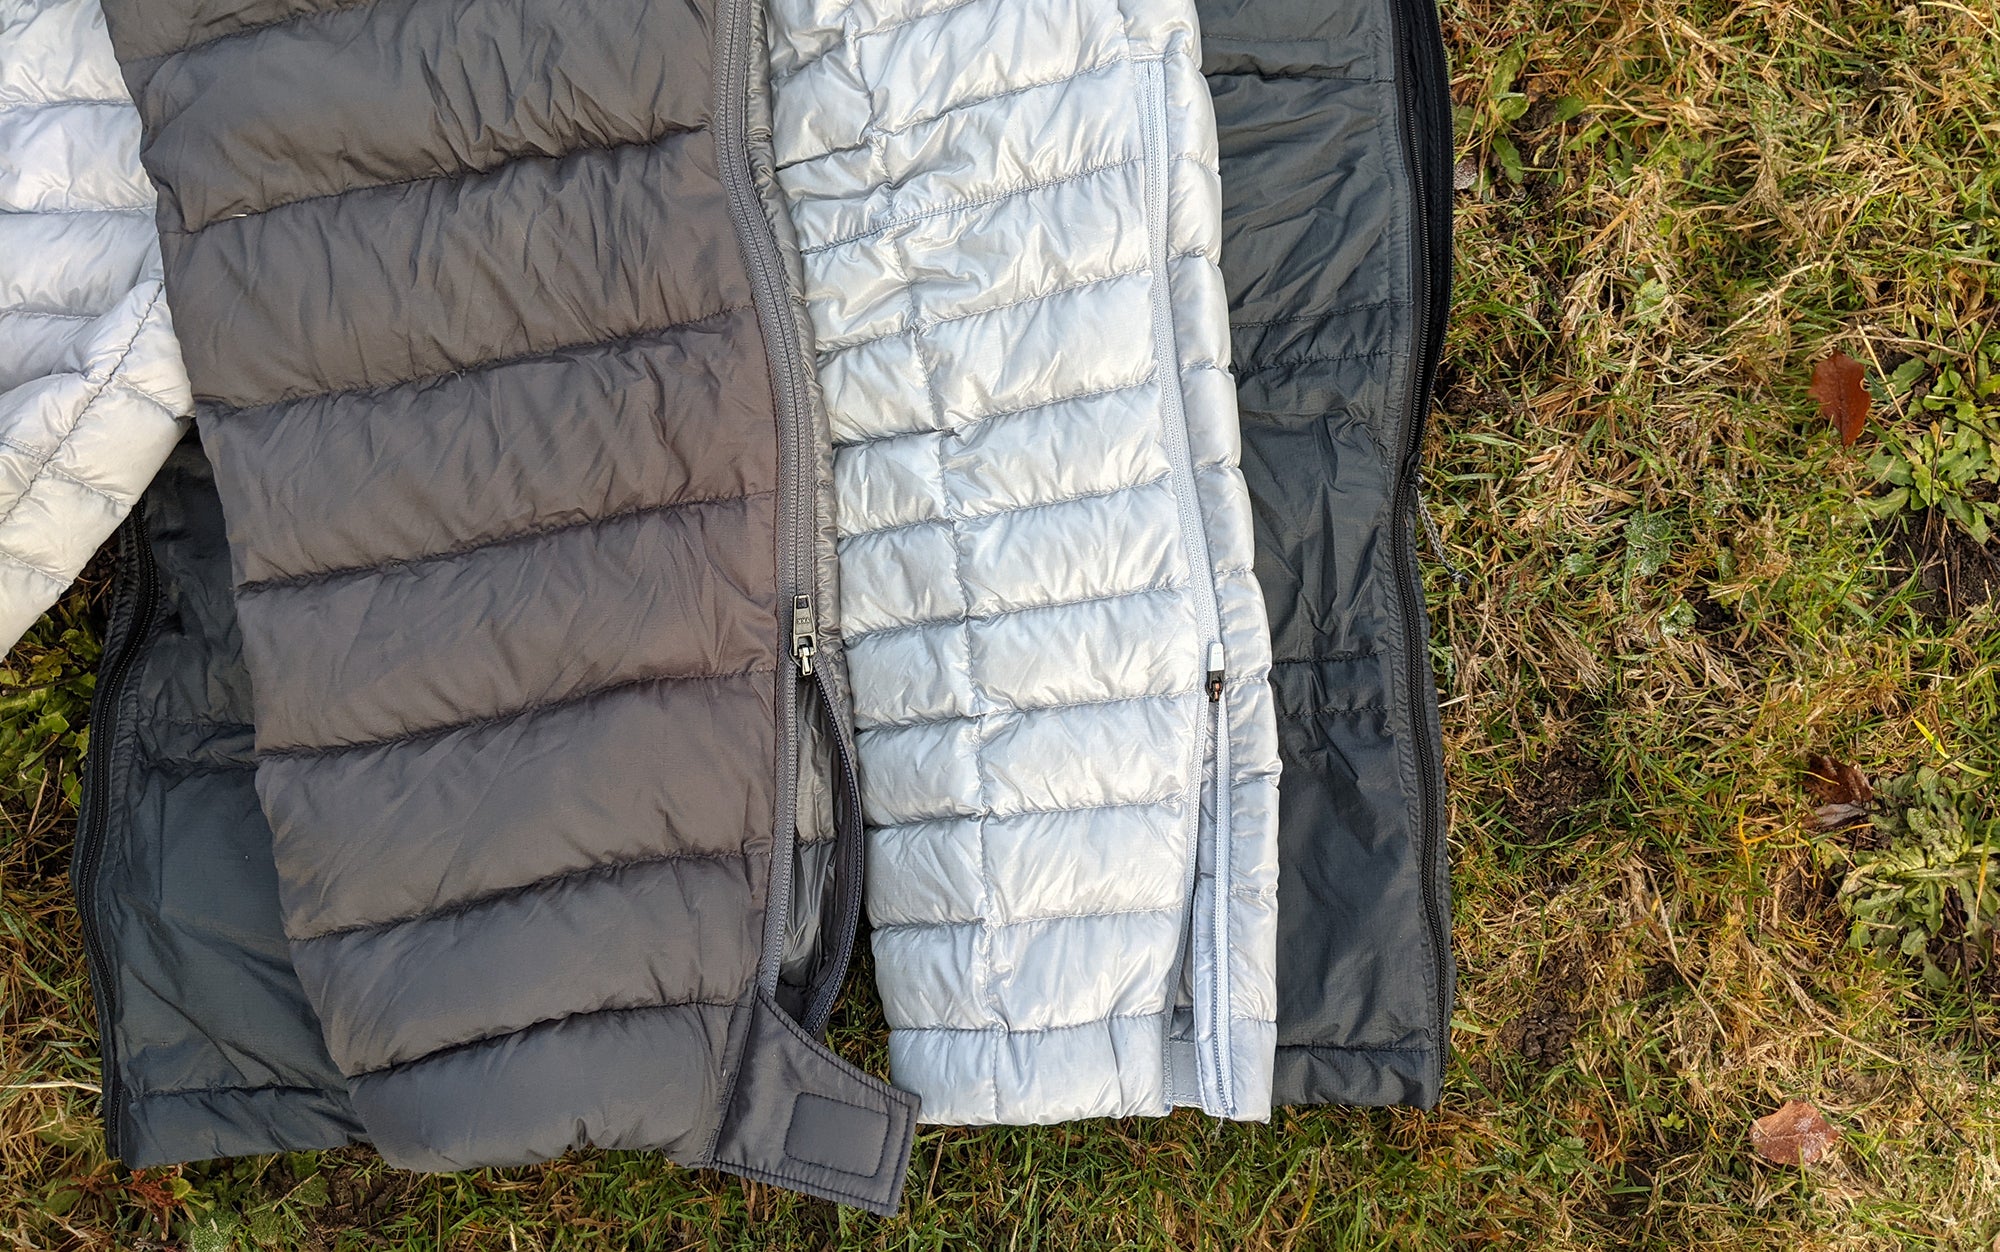 The Stone Glacier Grumman (left) had a two-way side zip, which made it easier to take off than either the Mountain Hardwear Ghost Whisperer Pant (center), which had a zip that ran from the hem up to the mid-calf or the KUIU Super Down ULTRA Pant (right) which had a one-way zip that runs down from the waist. 